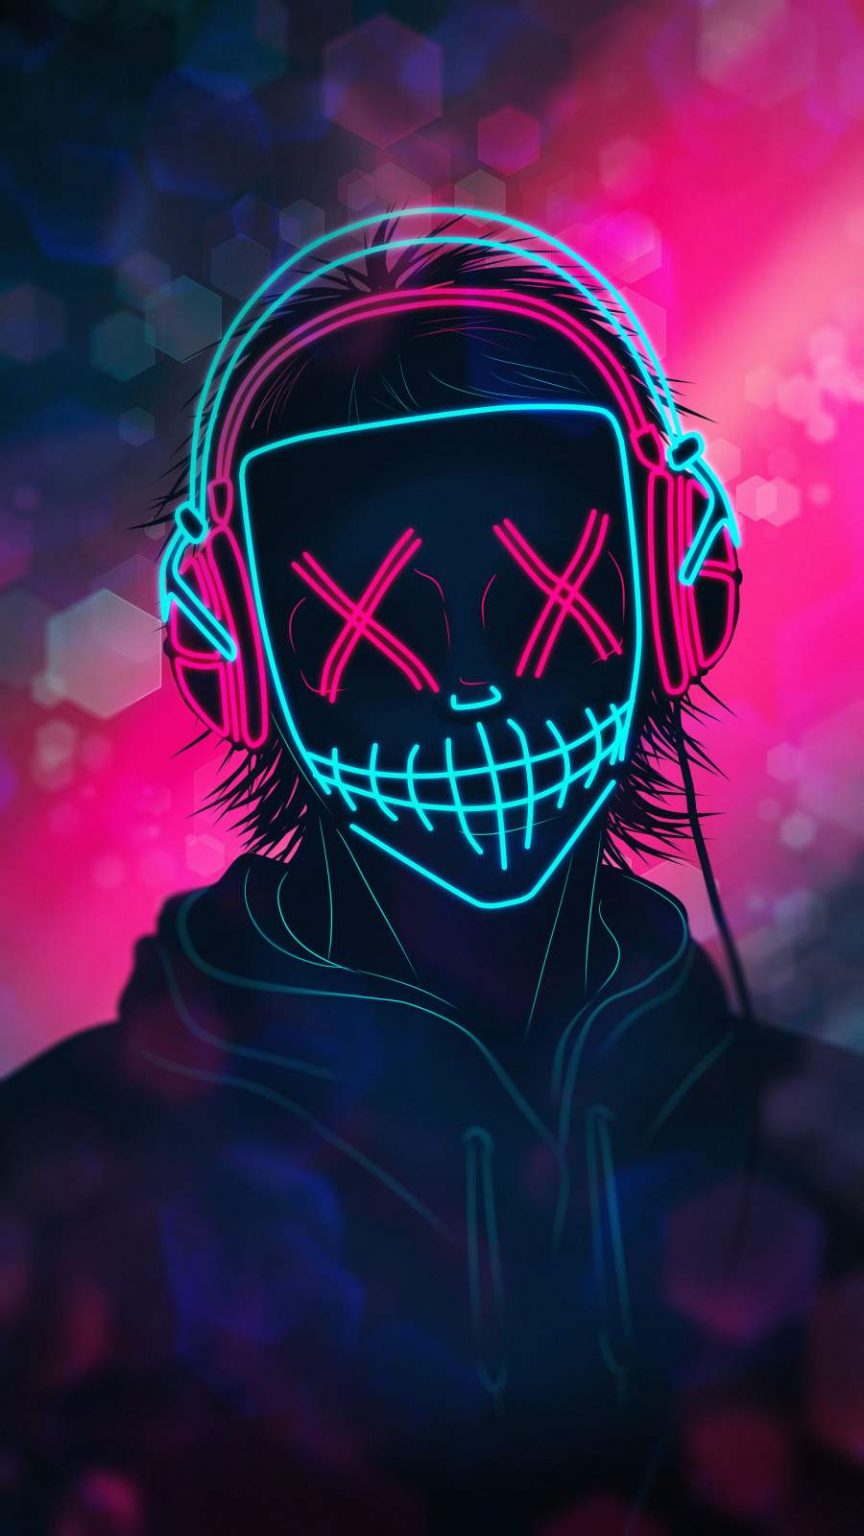 Neon Mask Music - IPhone Wallpapers : iPhone Wallpapers